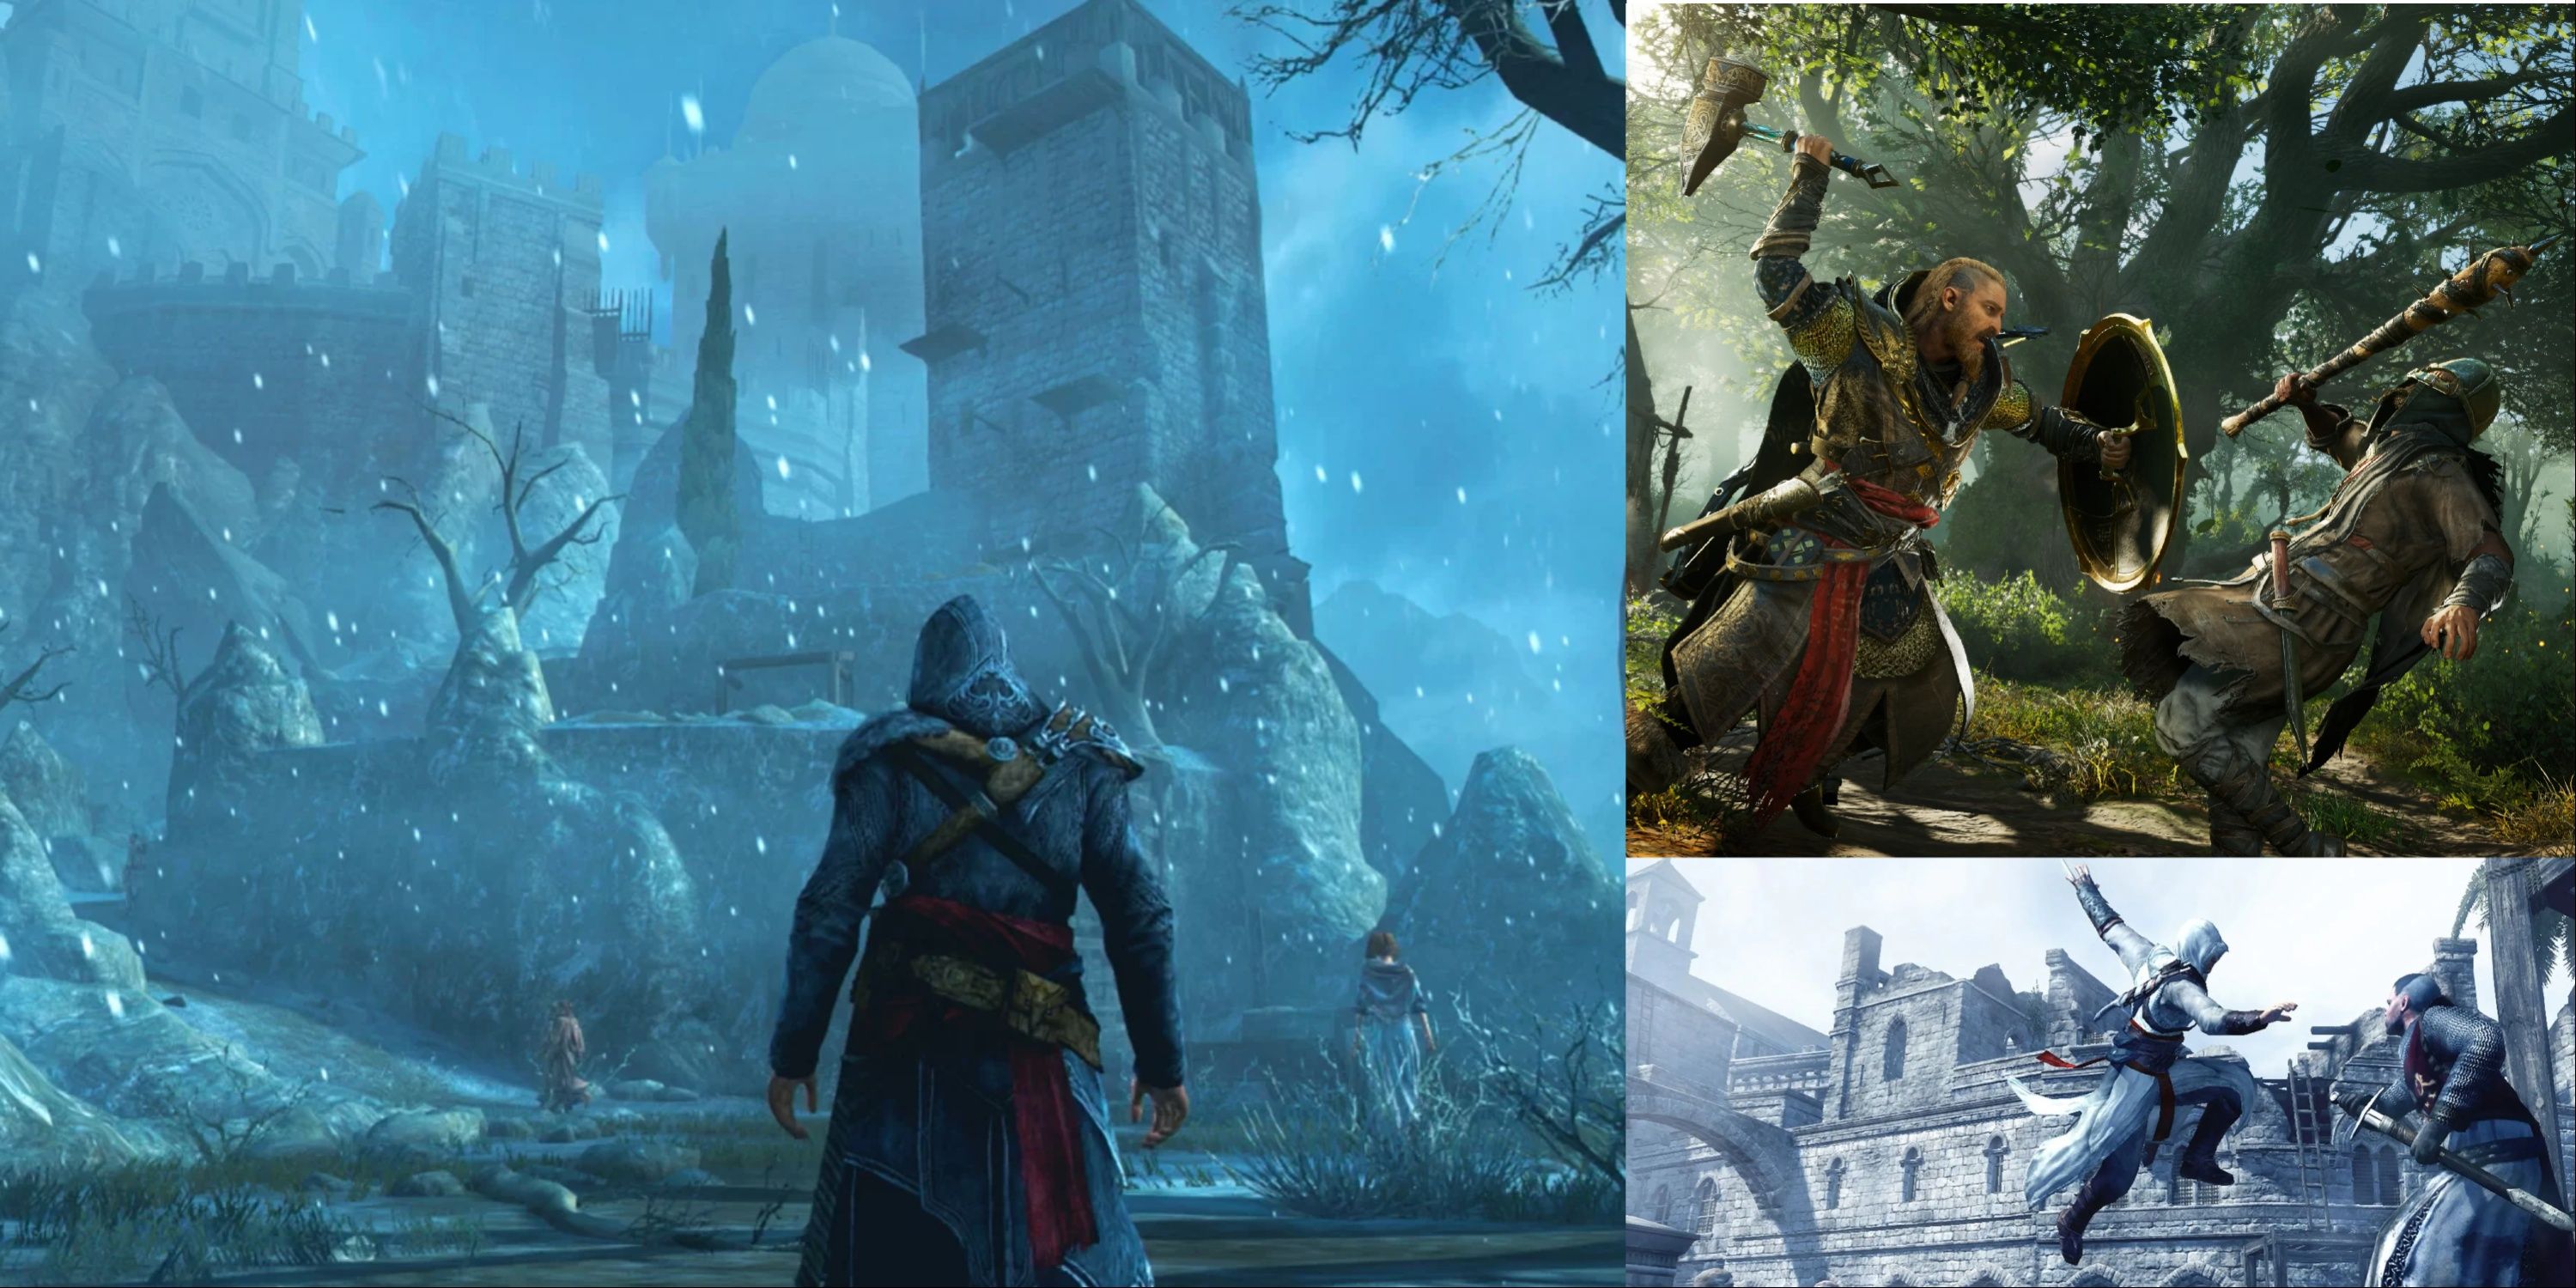 Every Assassin's Creed Game Ranked